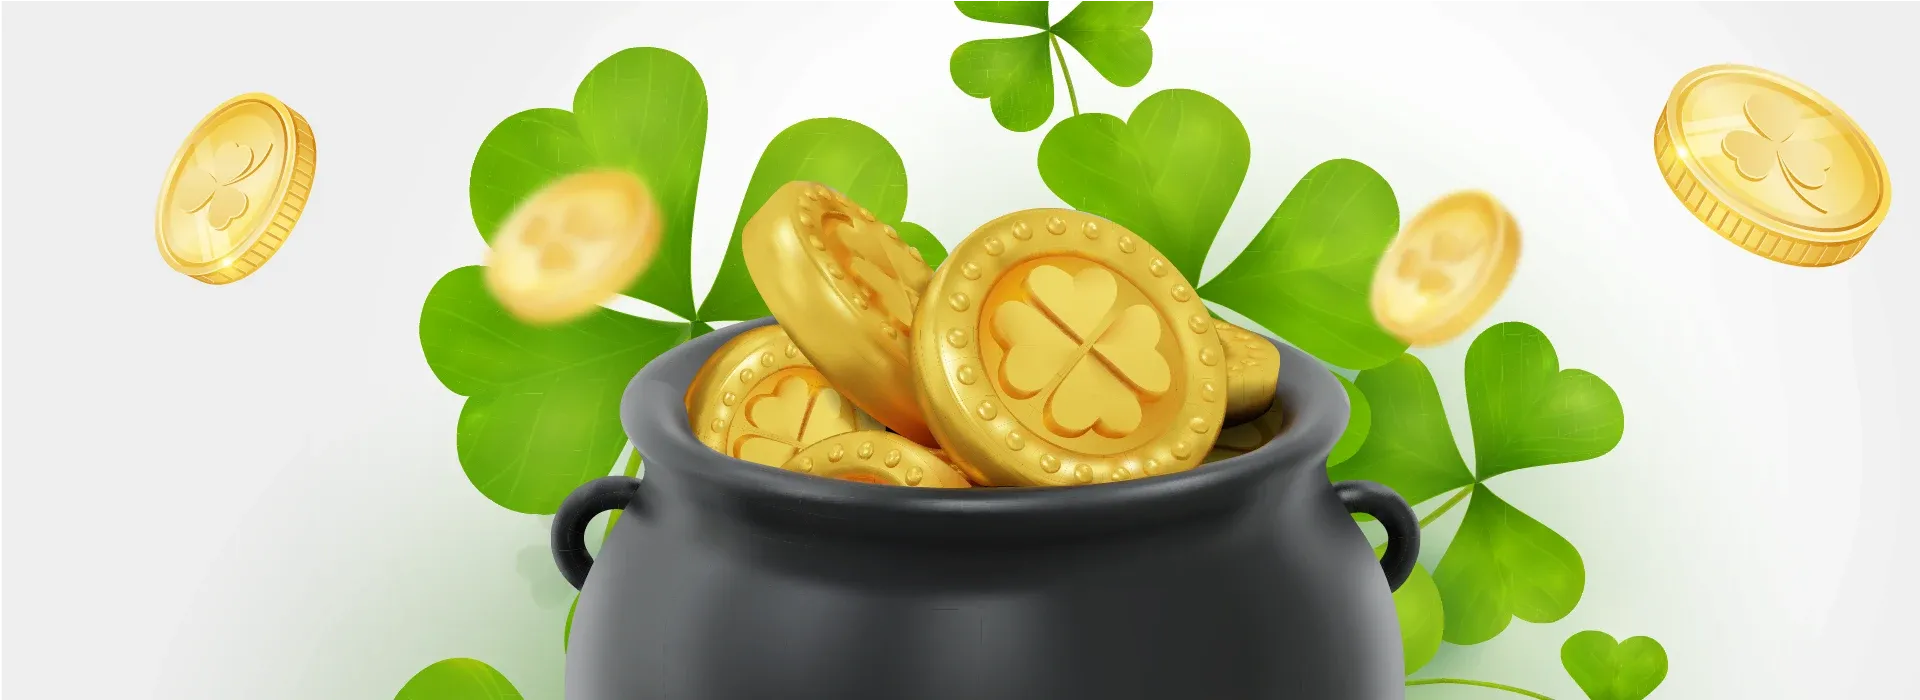 an image of a pot with coins in it, with clovers around